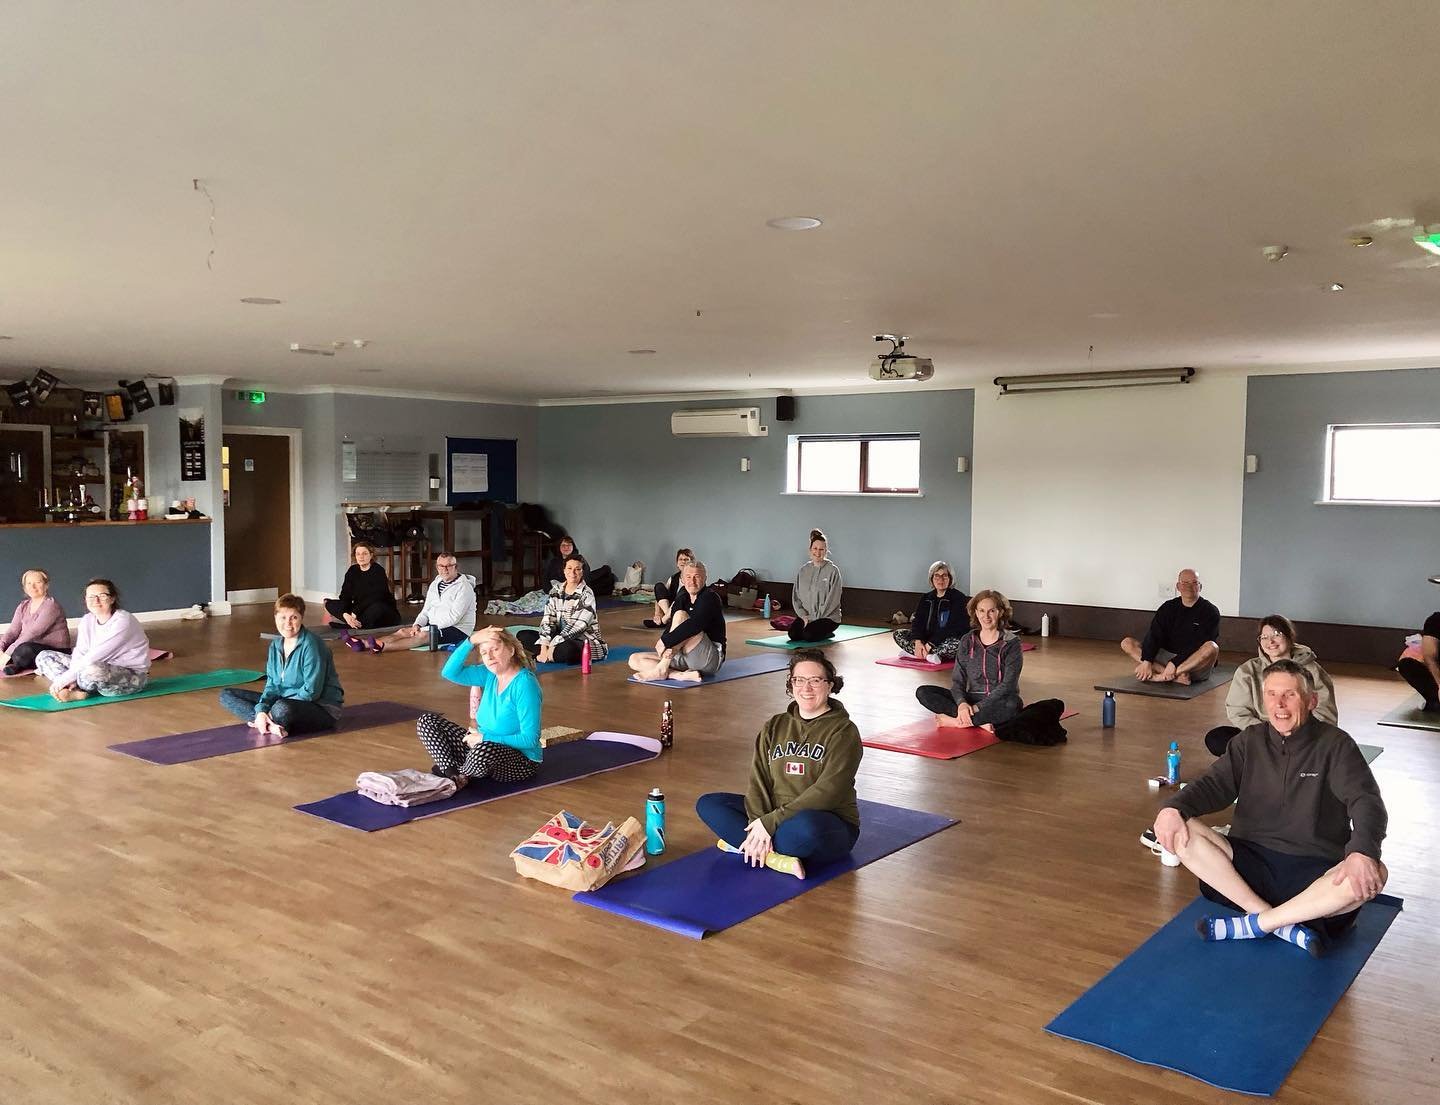 What an amazing first class we had at @chippenham_sports_club this evening!

Thank you so much to each of you who came along, it was such a joy to have you there and to meet lots of new faces too 🥰

I hope you enjoyed it! Can&rsquo;t wait to see you